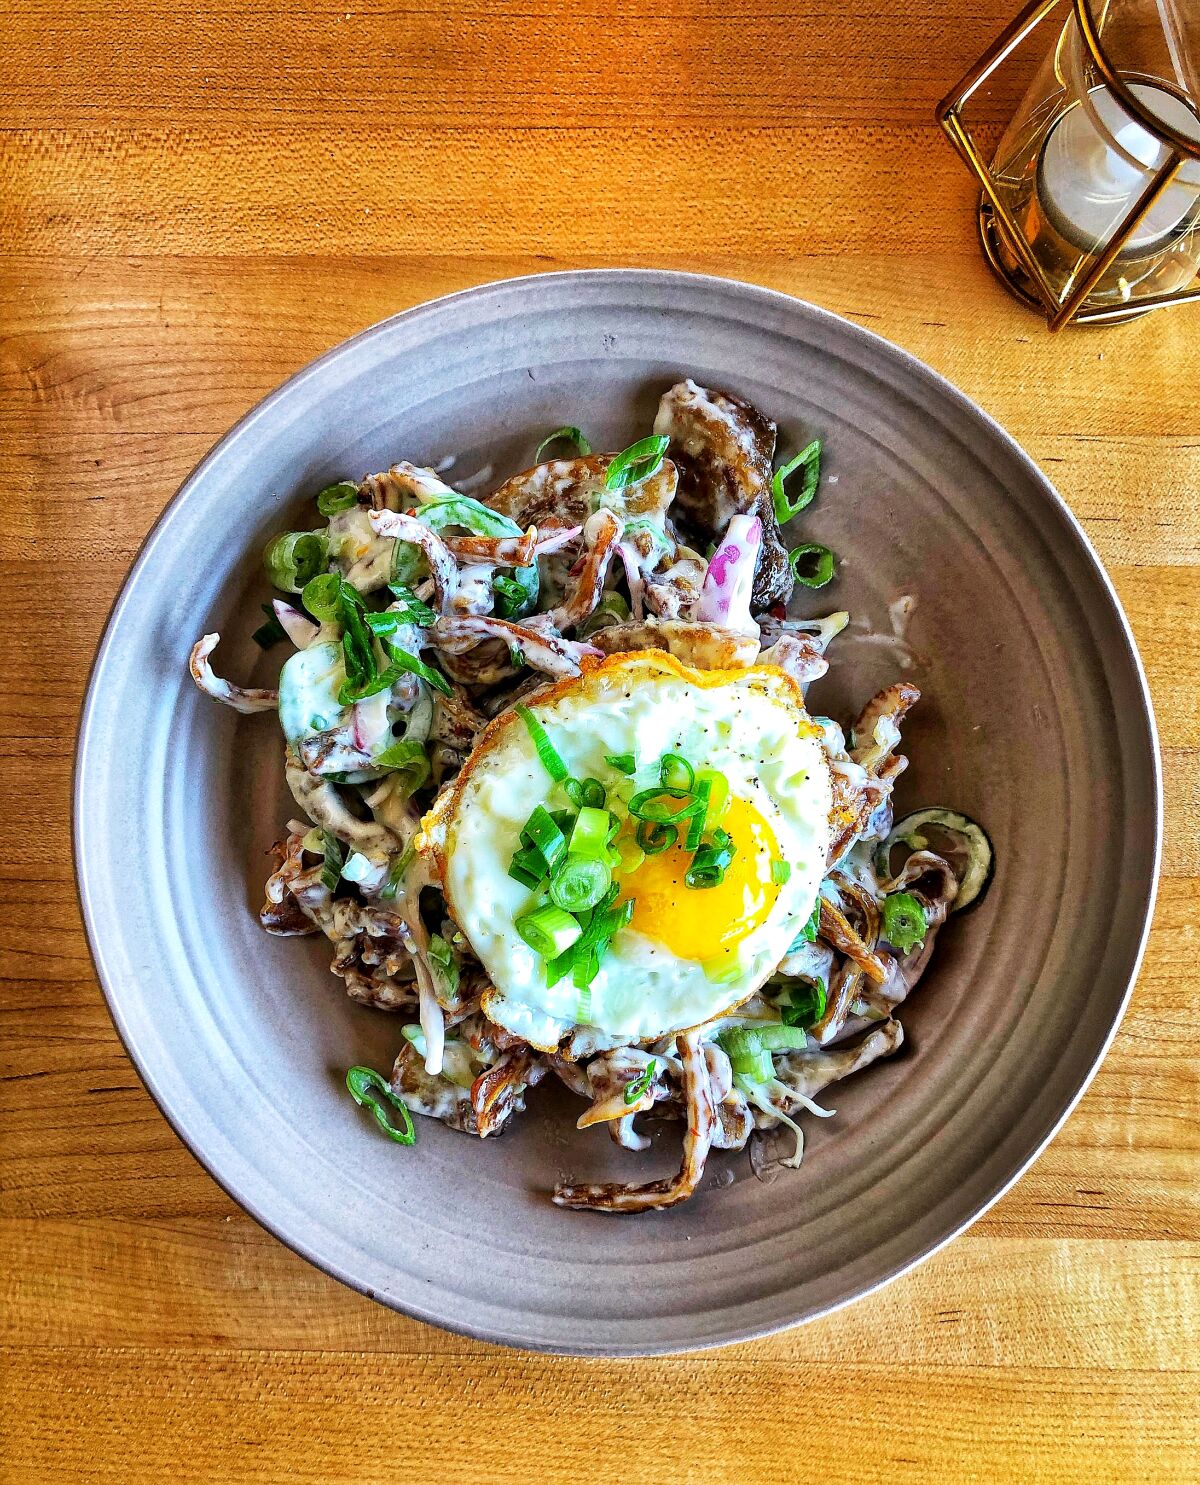 Chef Danino "DJ" Tangalin gives the traditional sisig a twist by making it with pig ears instead of minced pork.